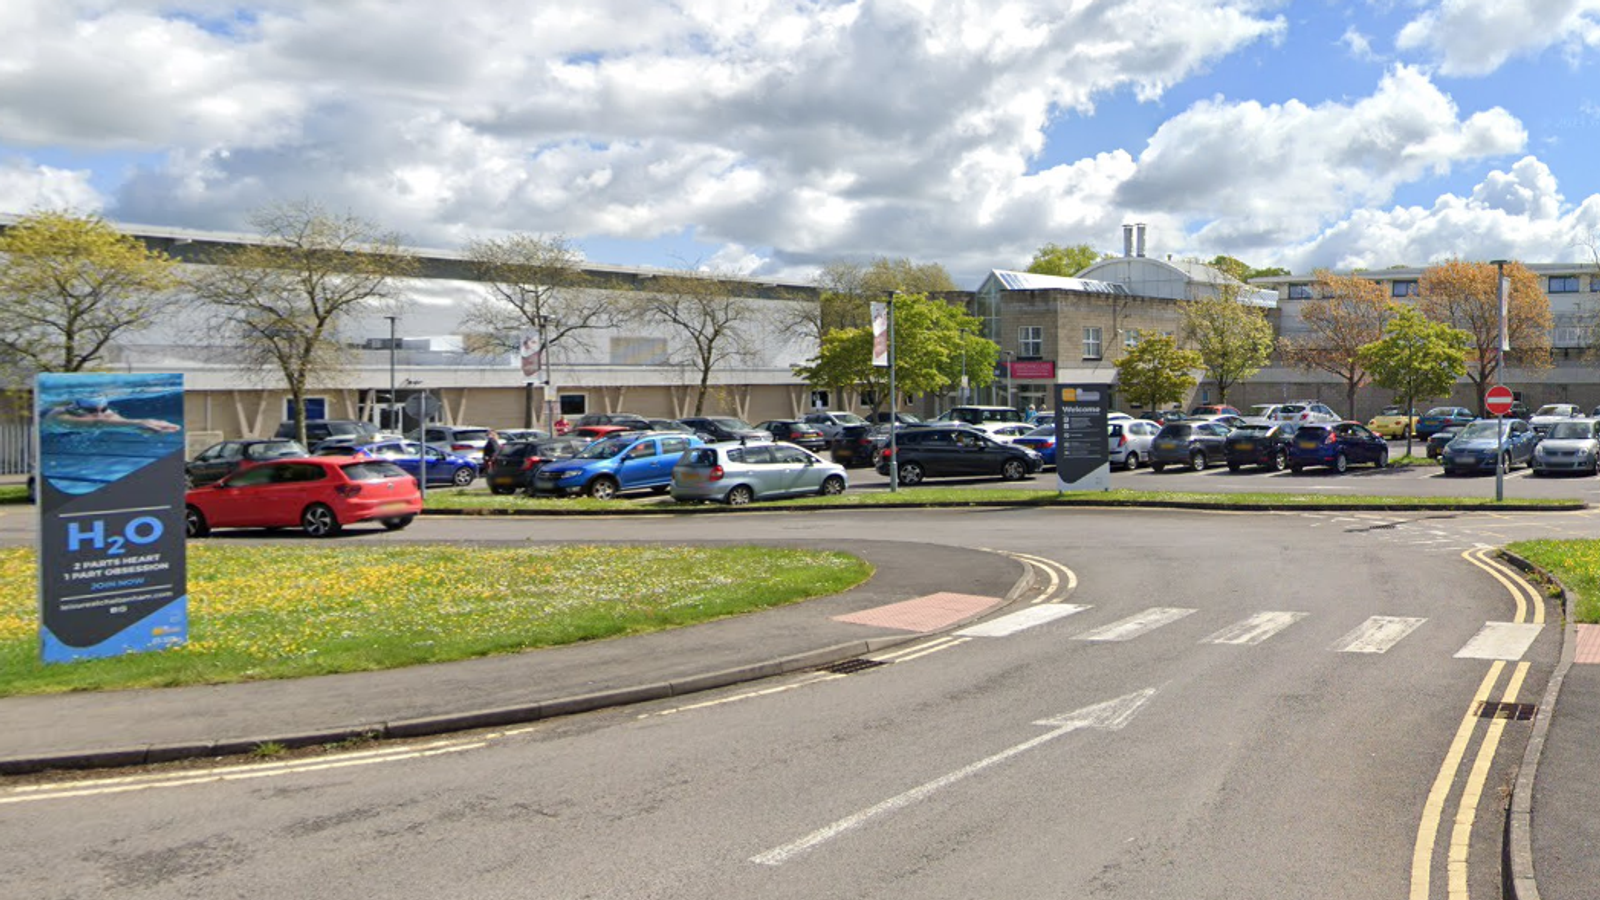 Man arrested on suspicion of terrorism offences after woman stabbed in Cheltenham on Thursday